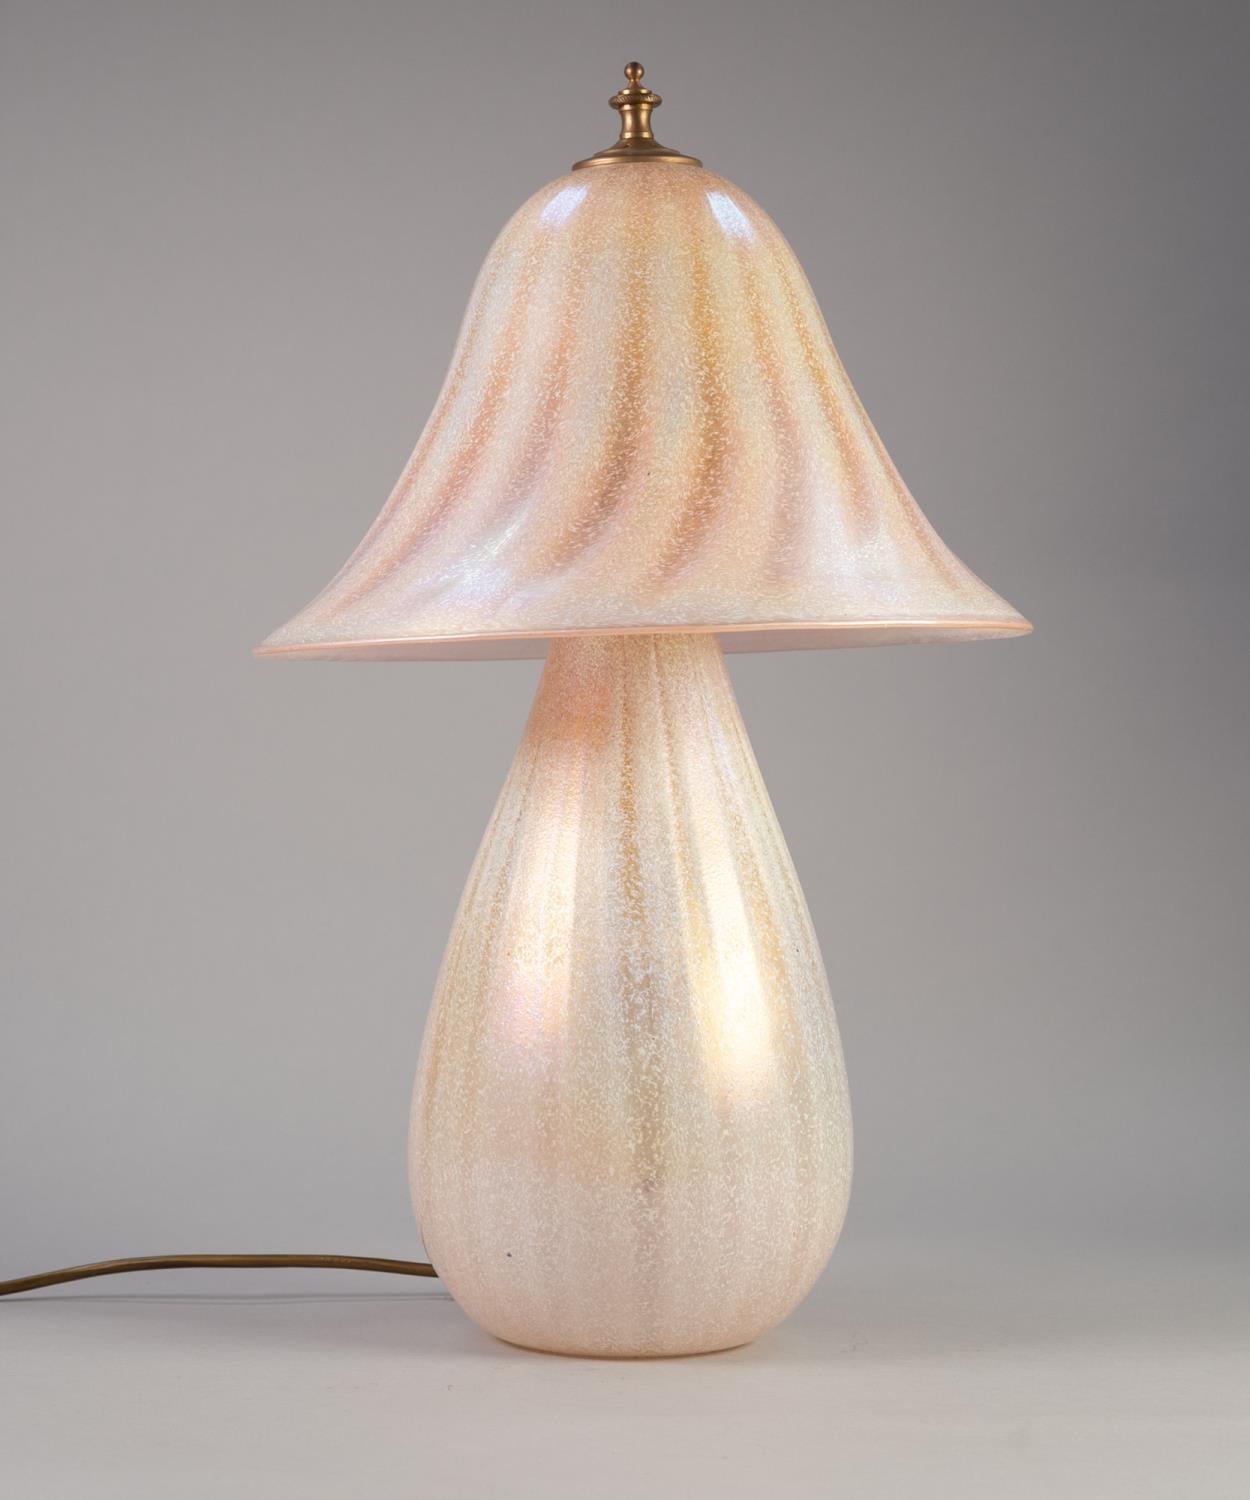 JOHN DITCHFIELD/ GLASFORM MOTHER OF PEARL IRIDESCENT GLASS TABLE LAMP AND SHADE, the base of